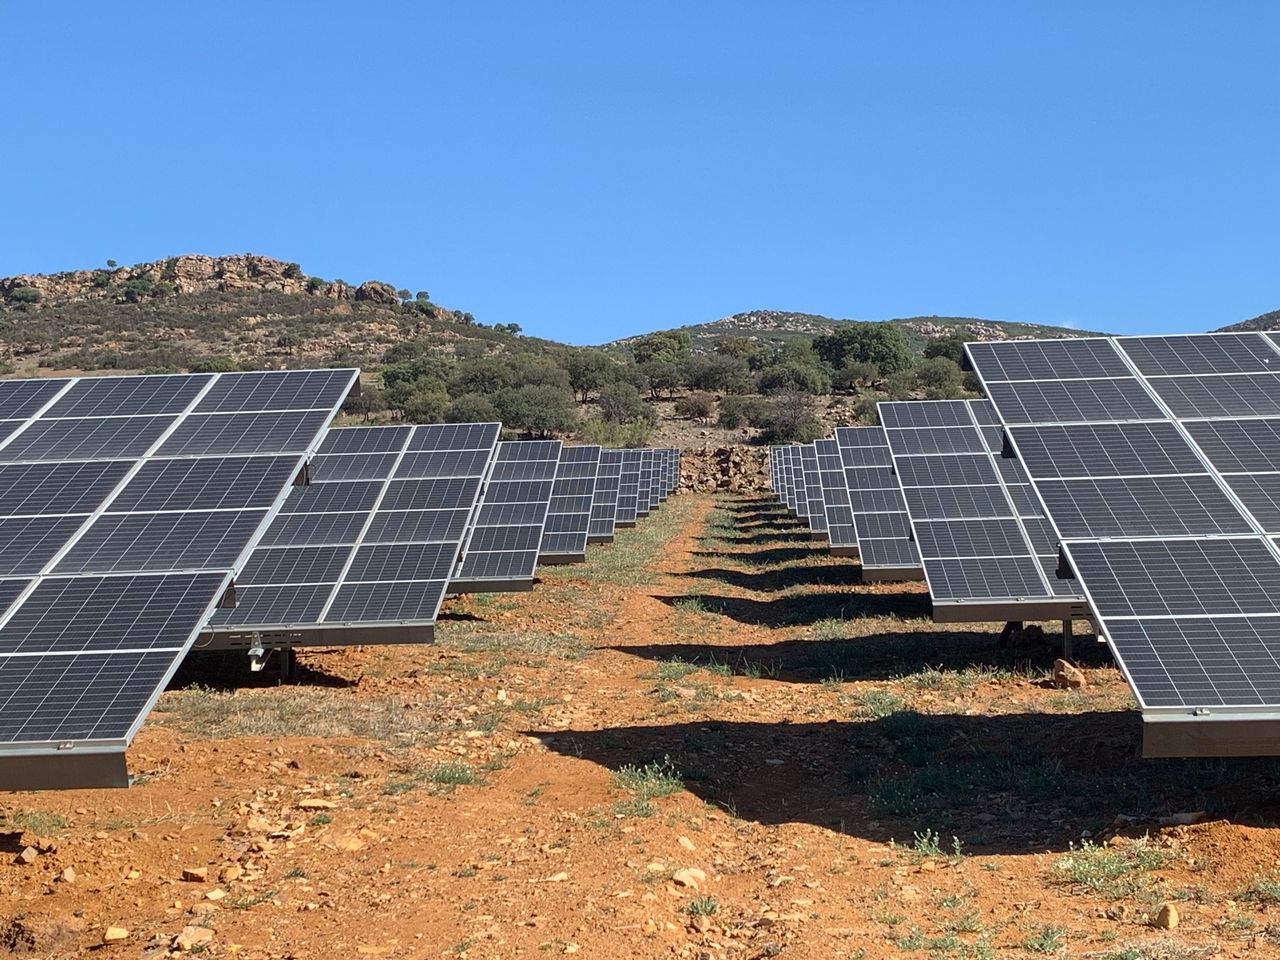 The field of solar panels, with olive trees in the background. [Valérie Demon - RTS]